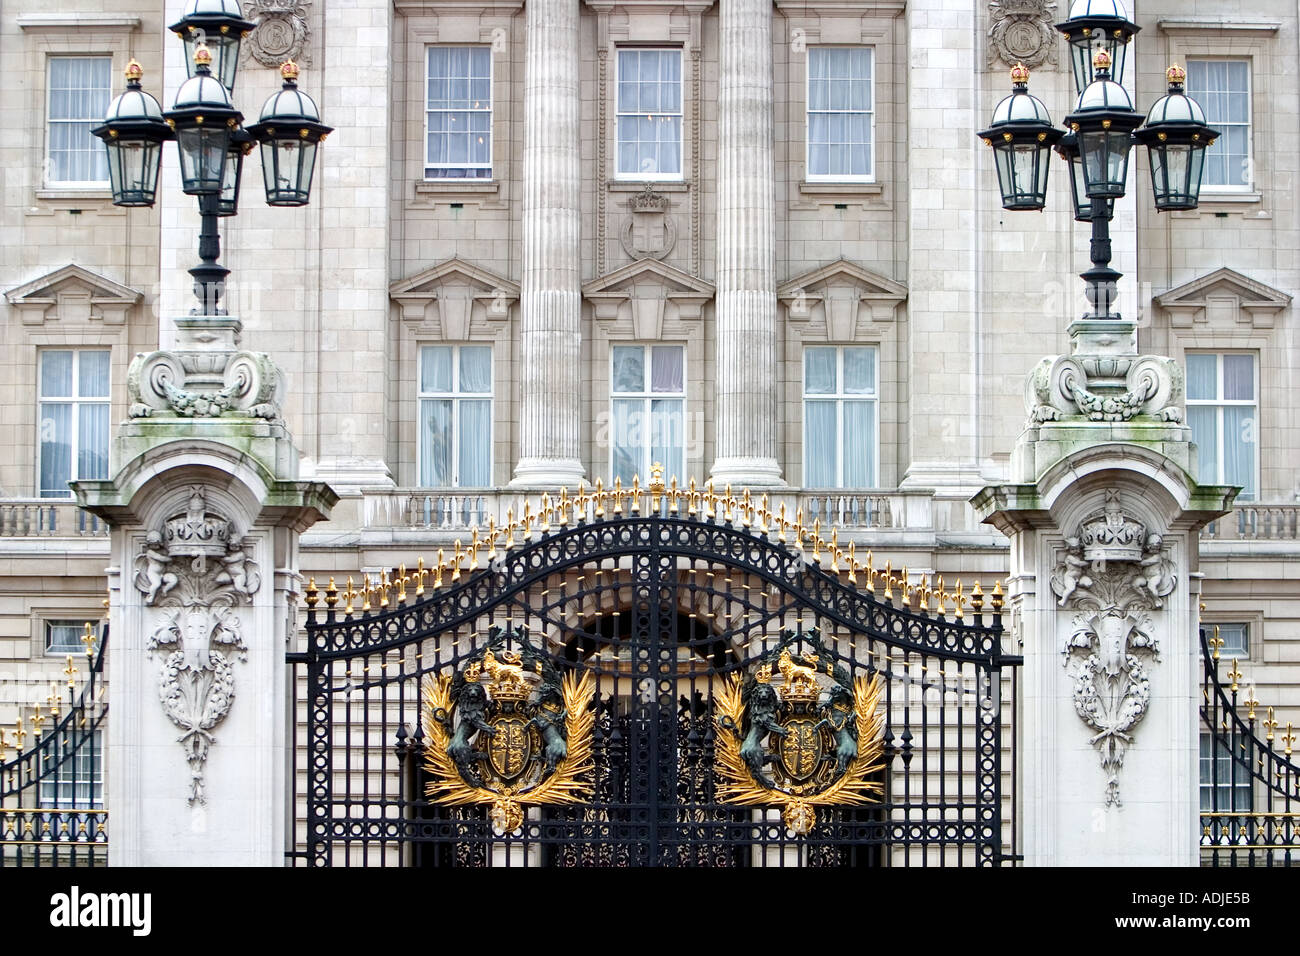 Main gates and lamps of Buckingham Palace London England one of the Queen s official residences Stock Photo